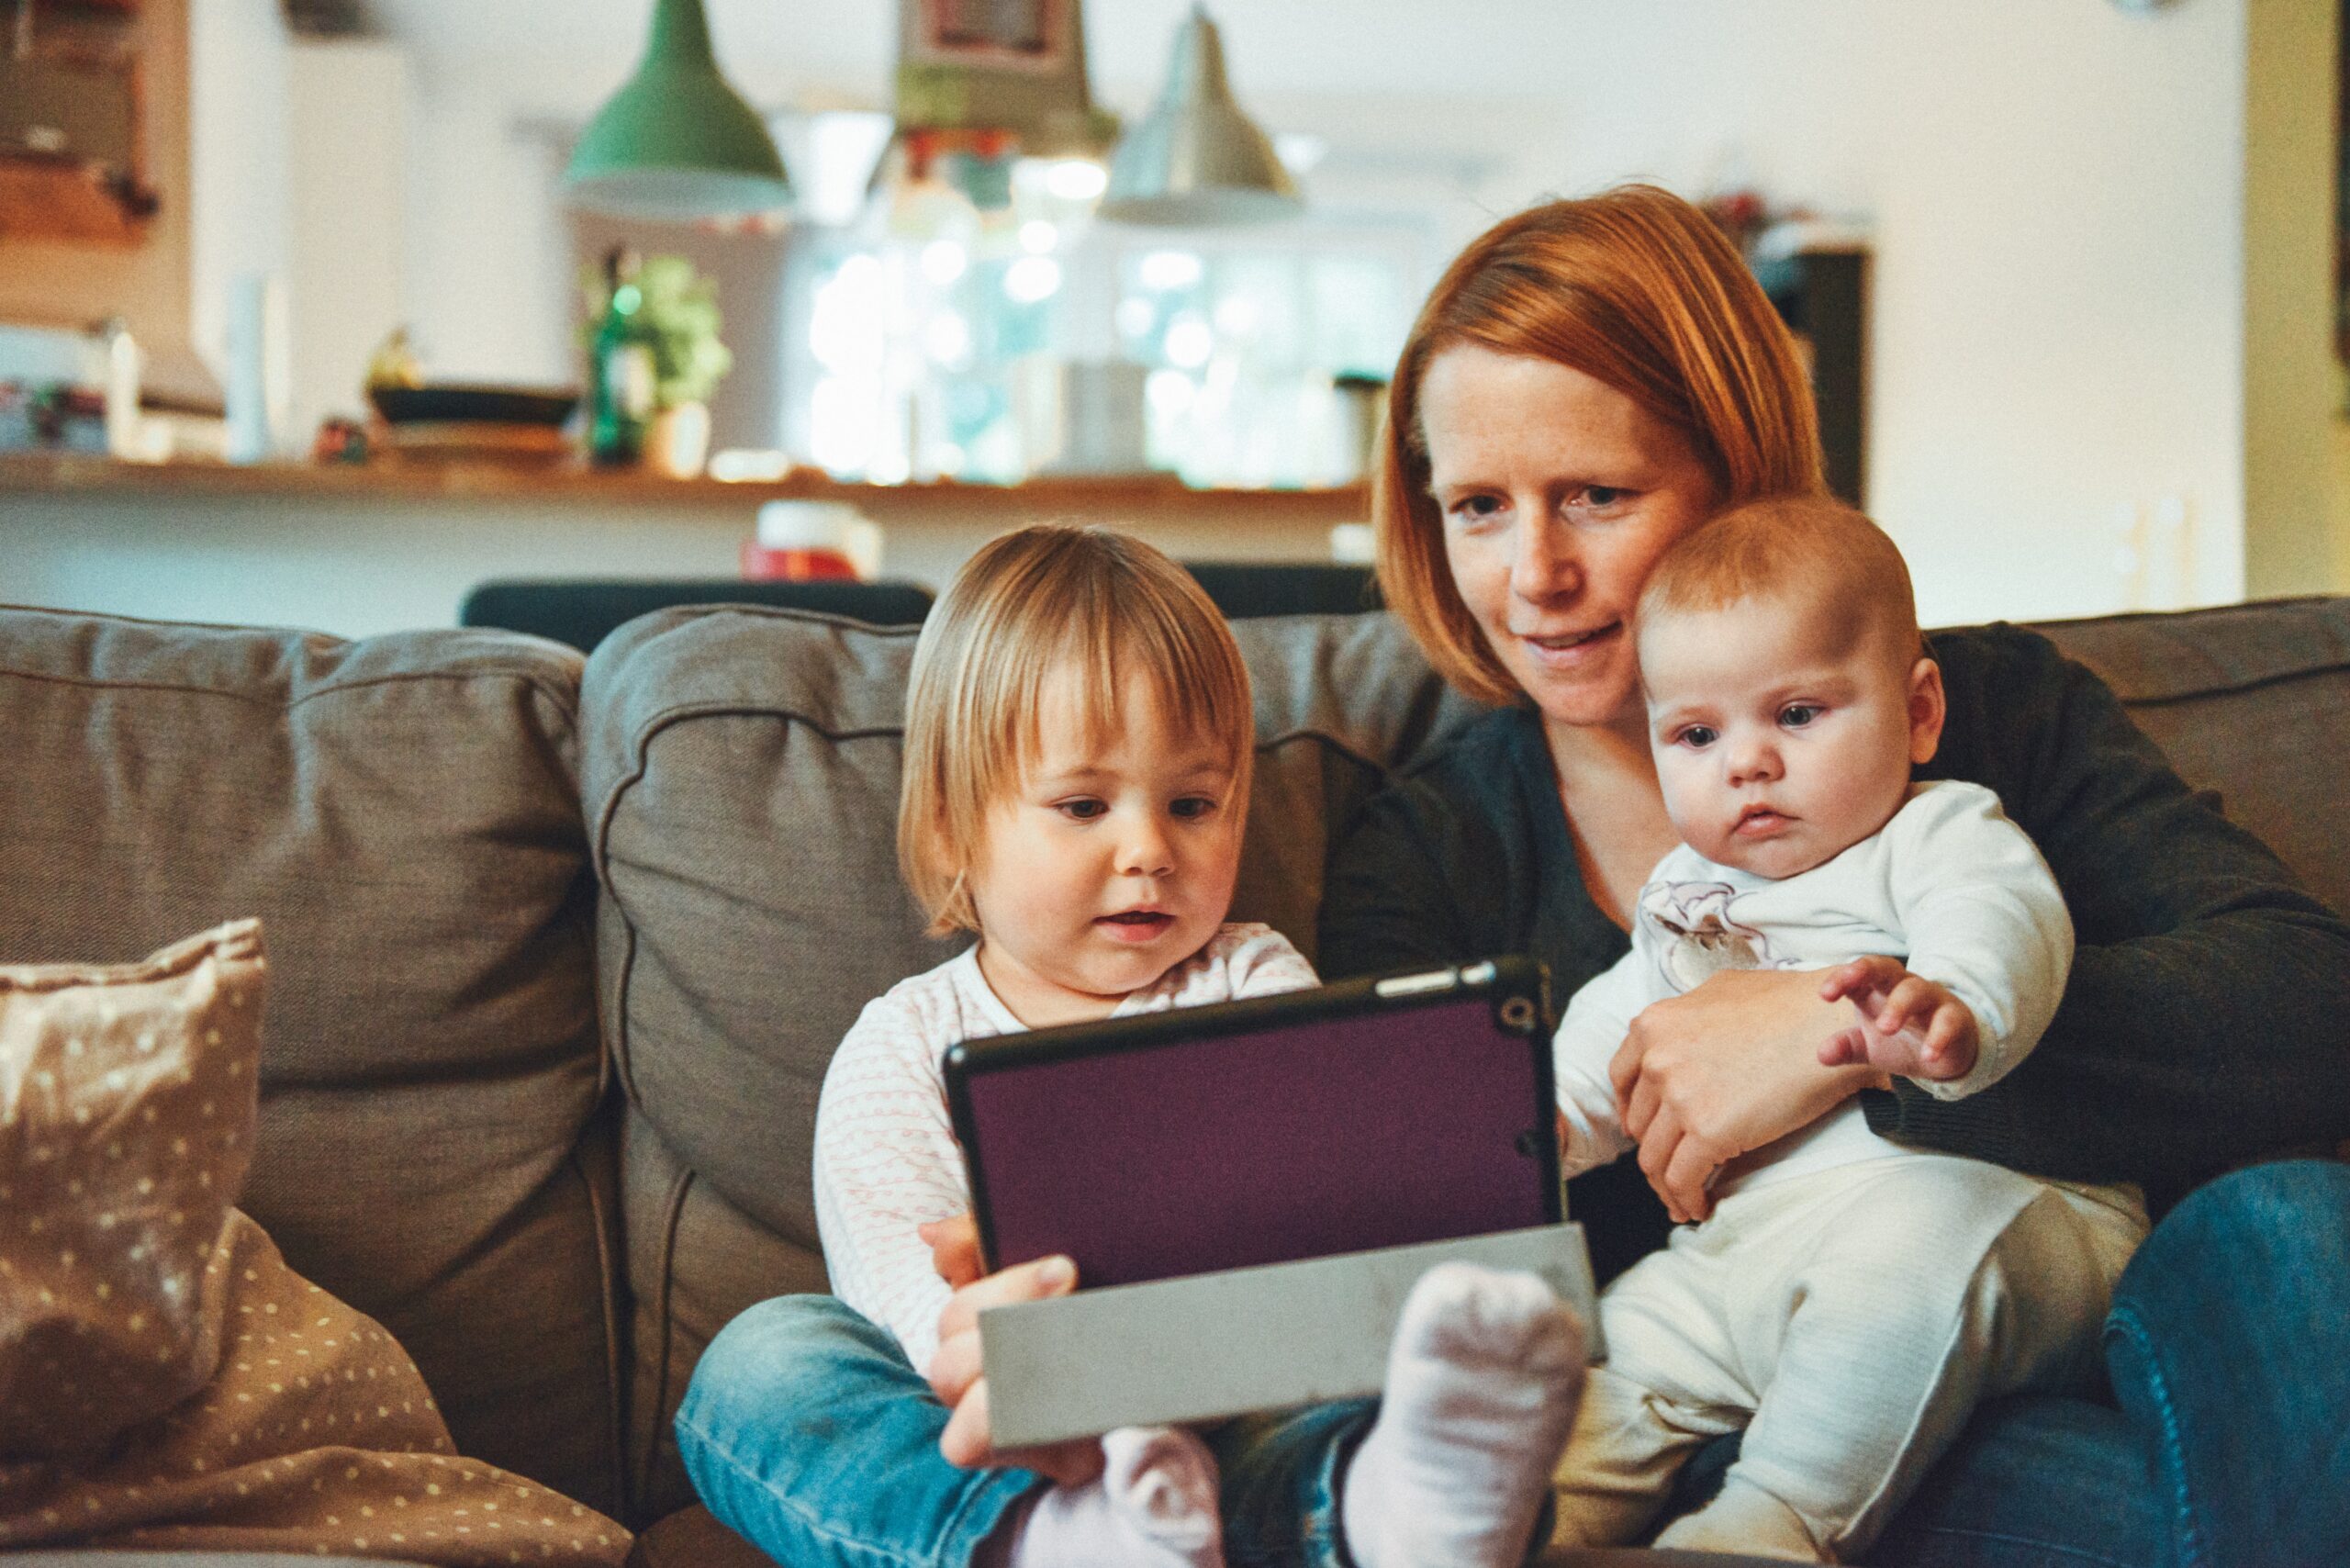 Redheaded mother on couch with toddler and baby looking at ipad